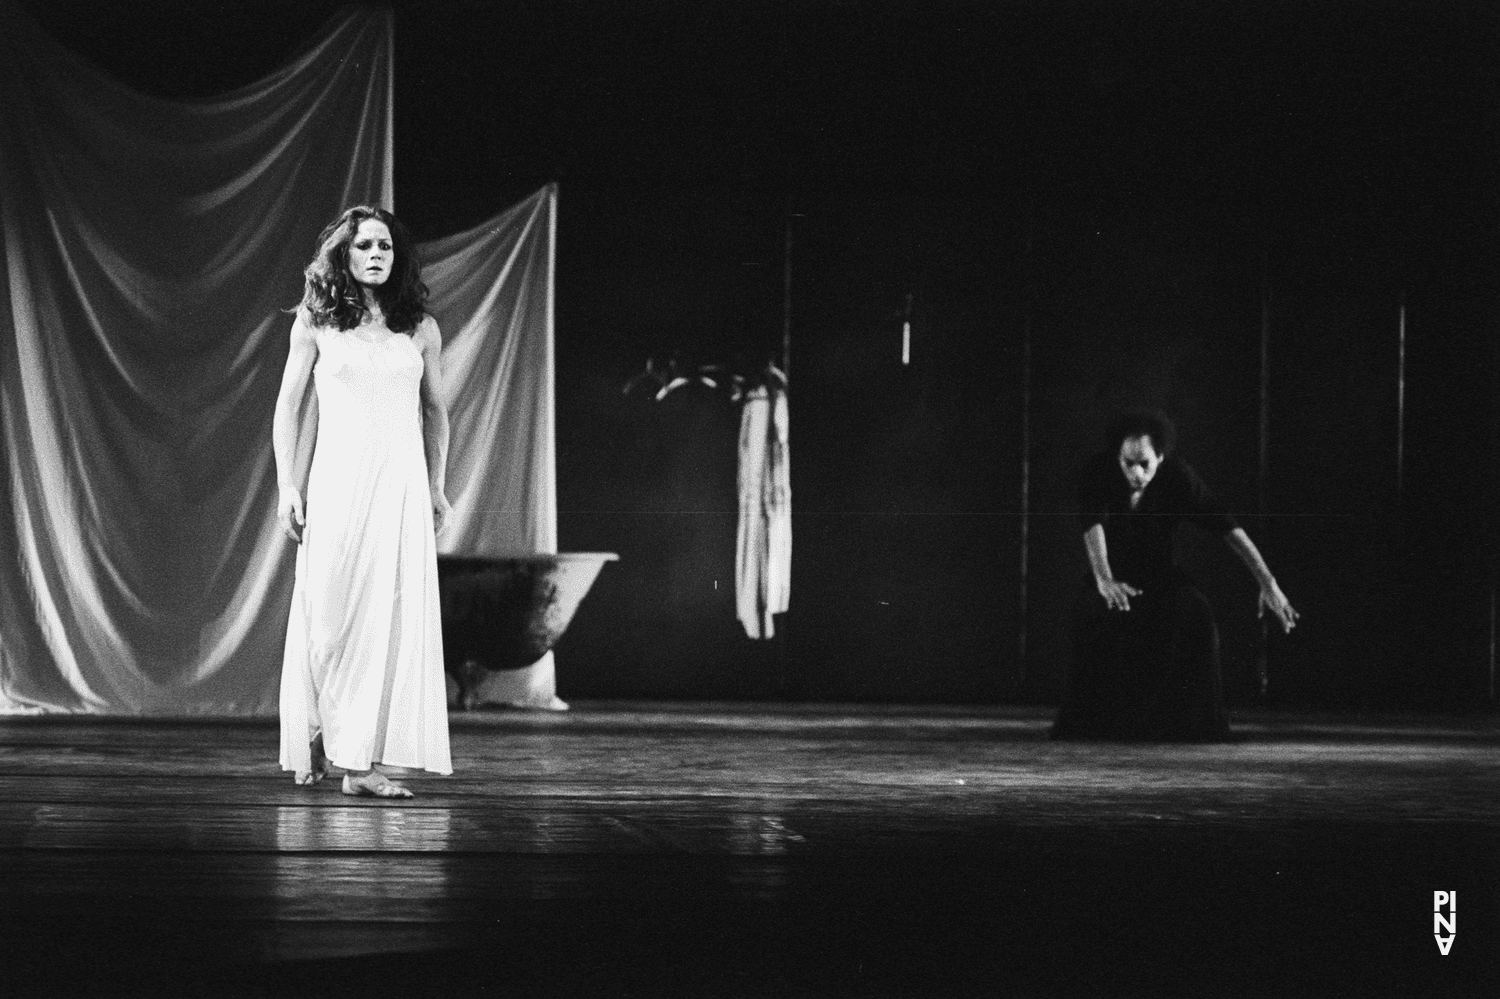 Malou Airaudo and Carlos Orta in “Iphigenie auf Tauris” by Pina Bausch at Opernhaus Wuppertal, April 20, 1974